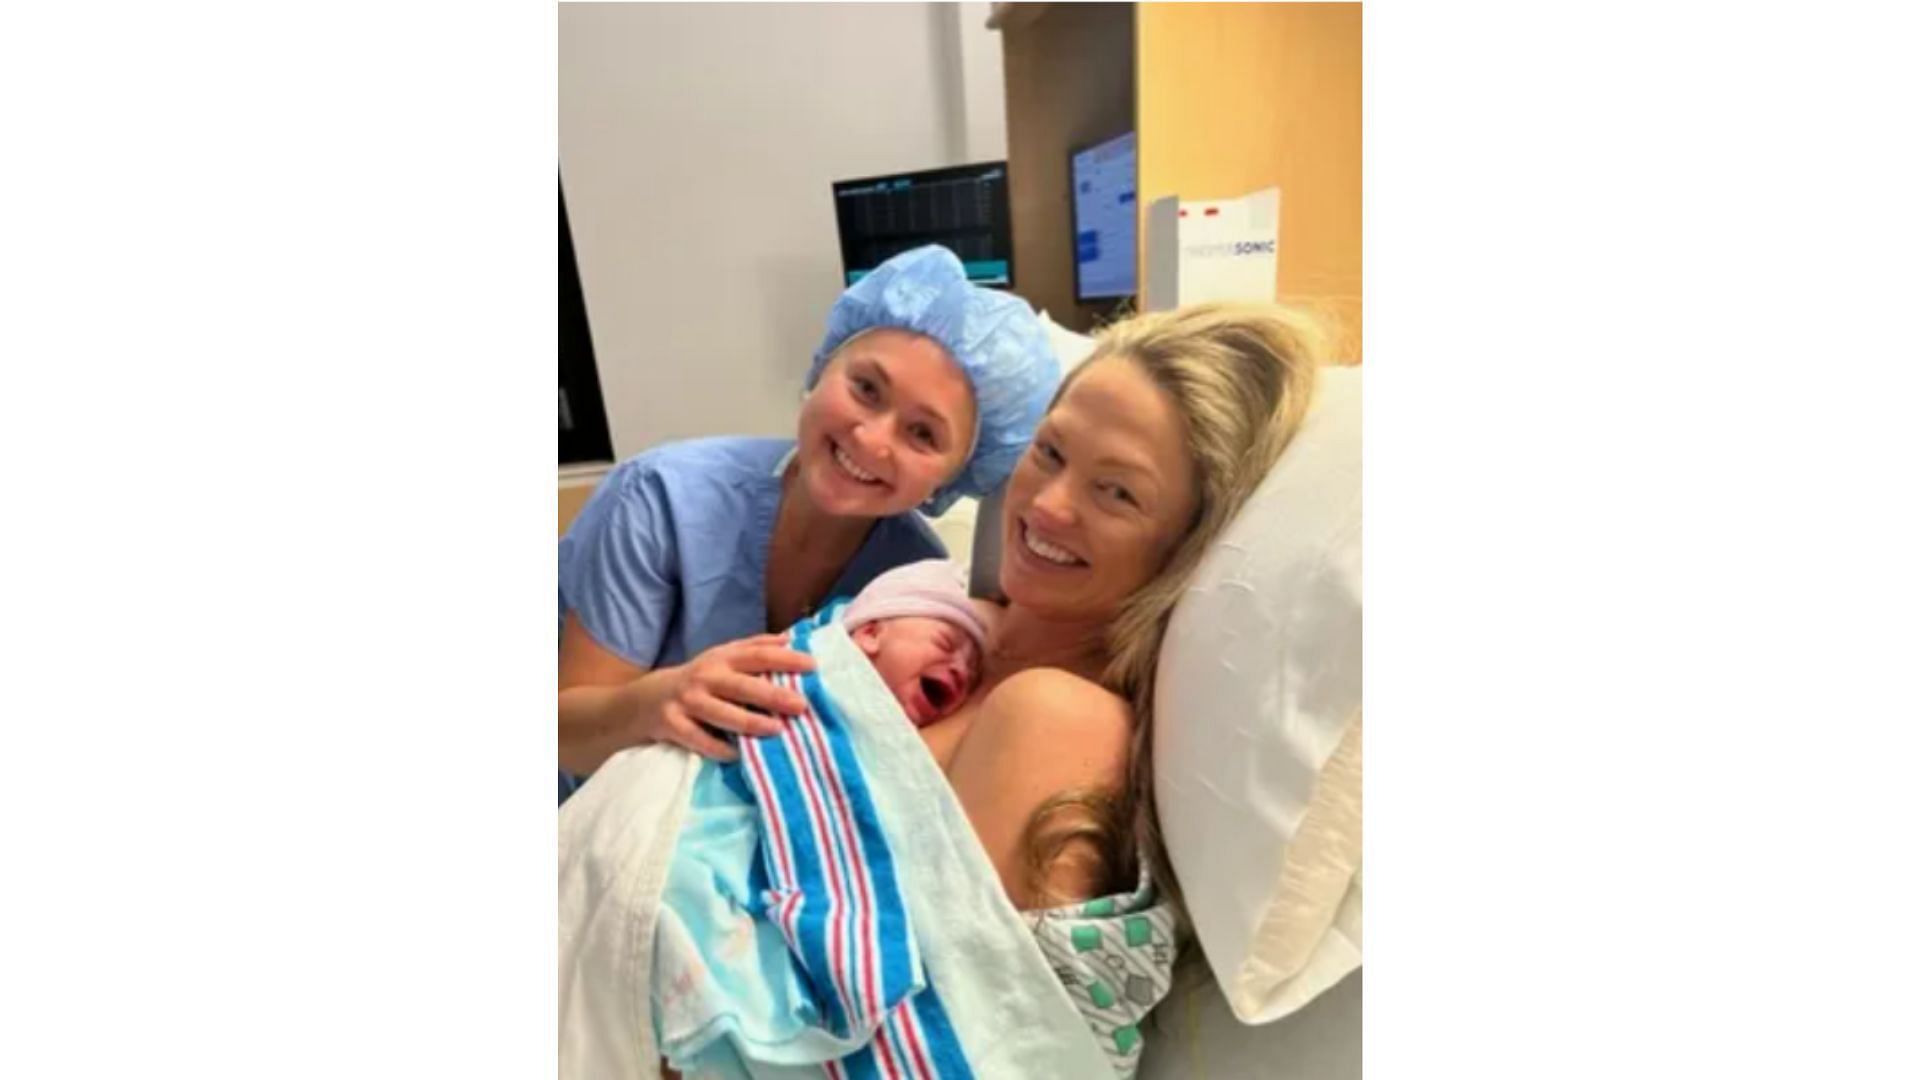 Allie LaForce with her sister and newborn son